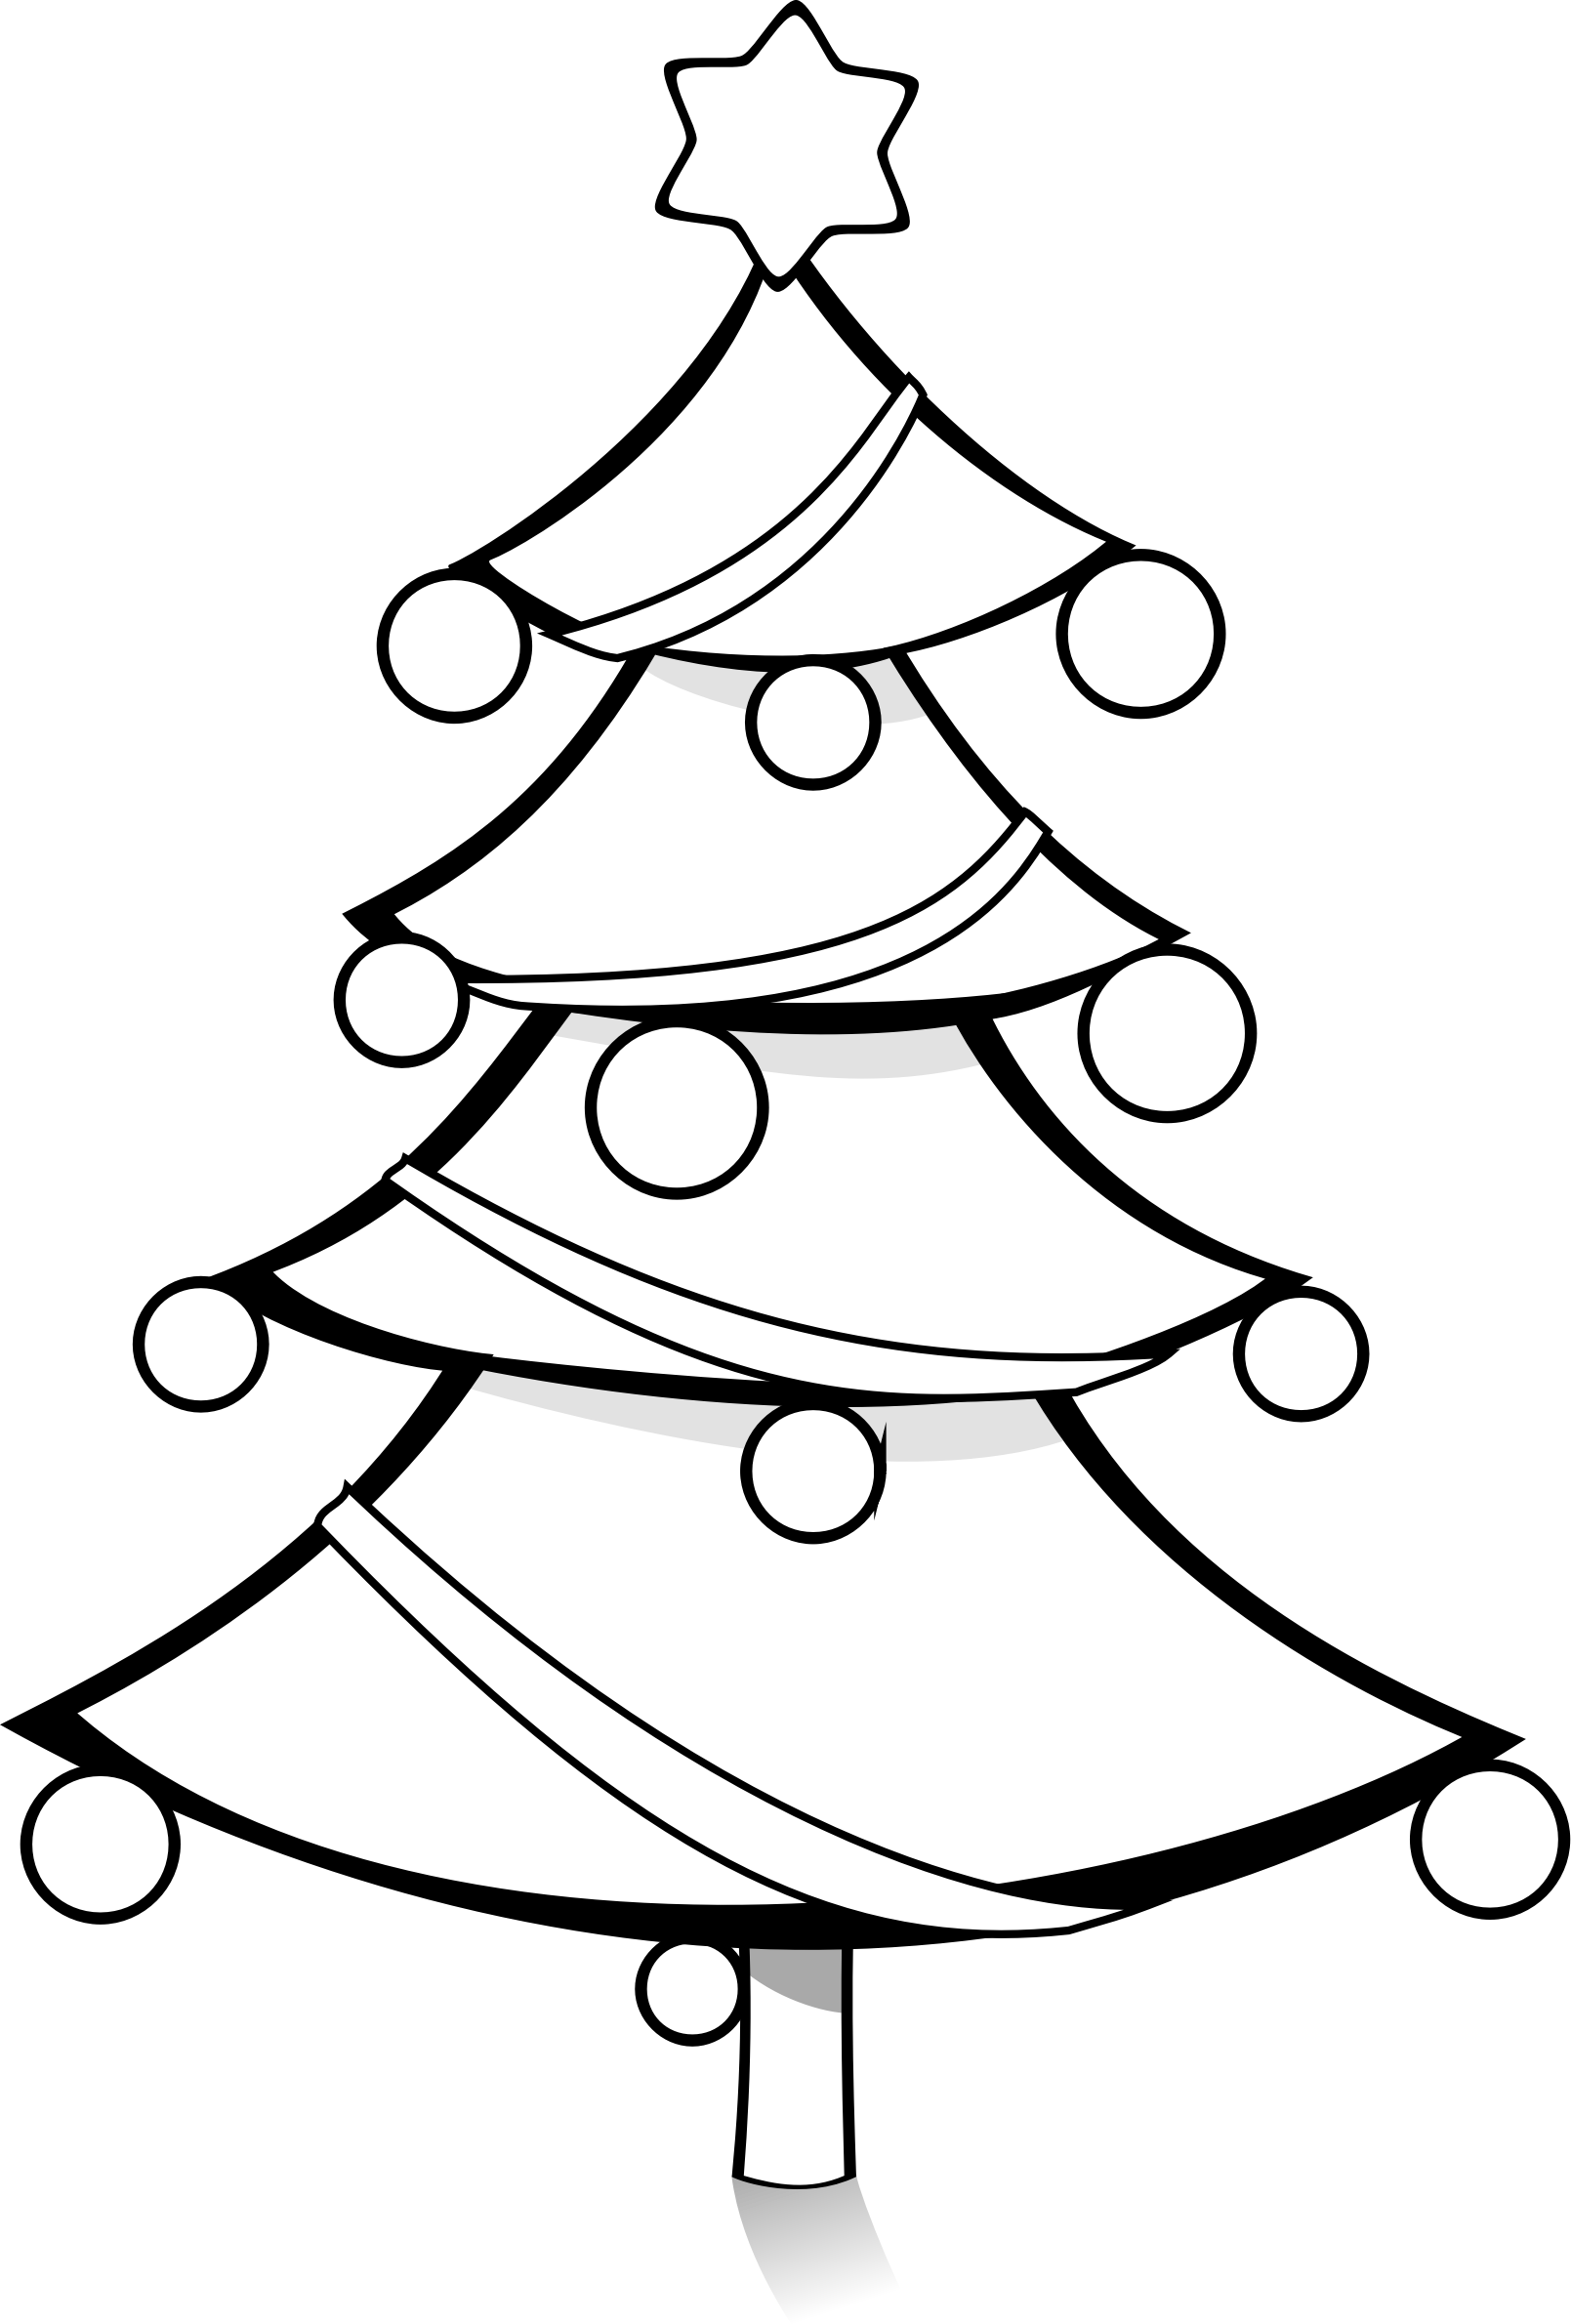 Christmas Tree Coloring Page Free download on ClipArtMag